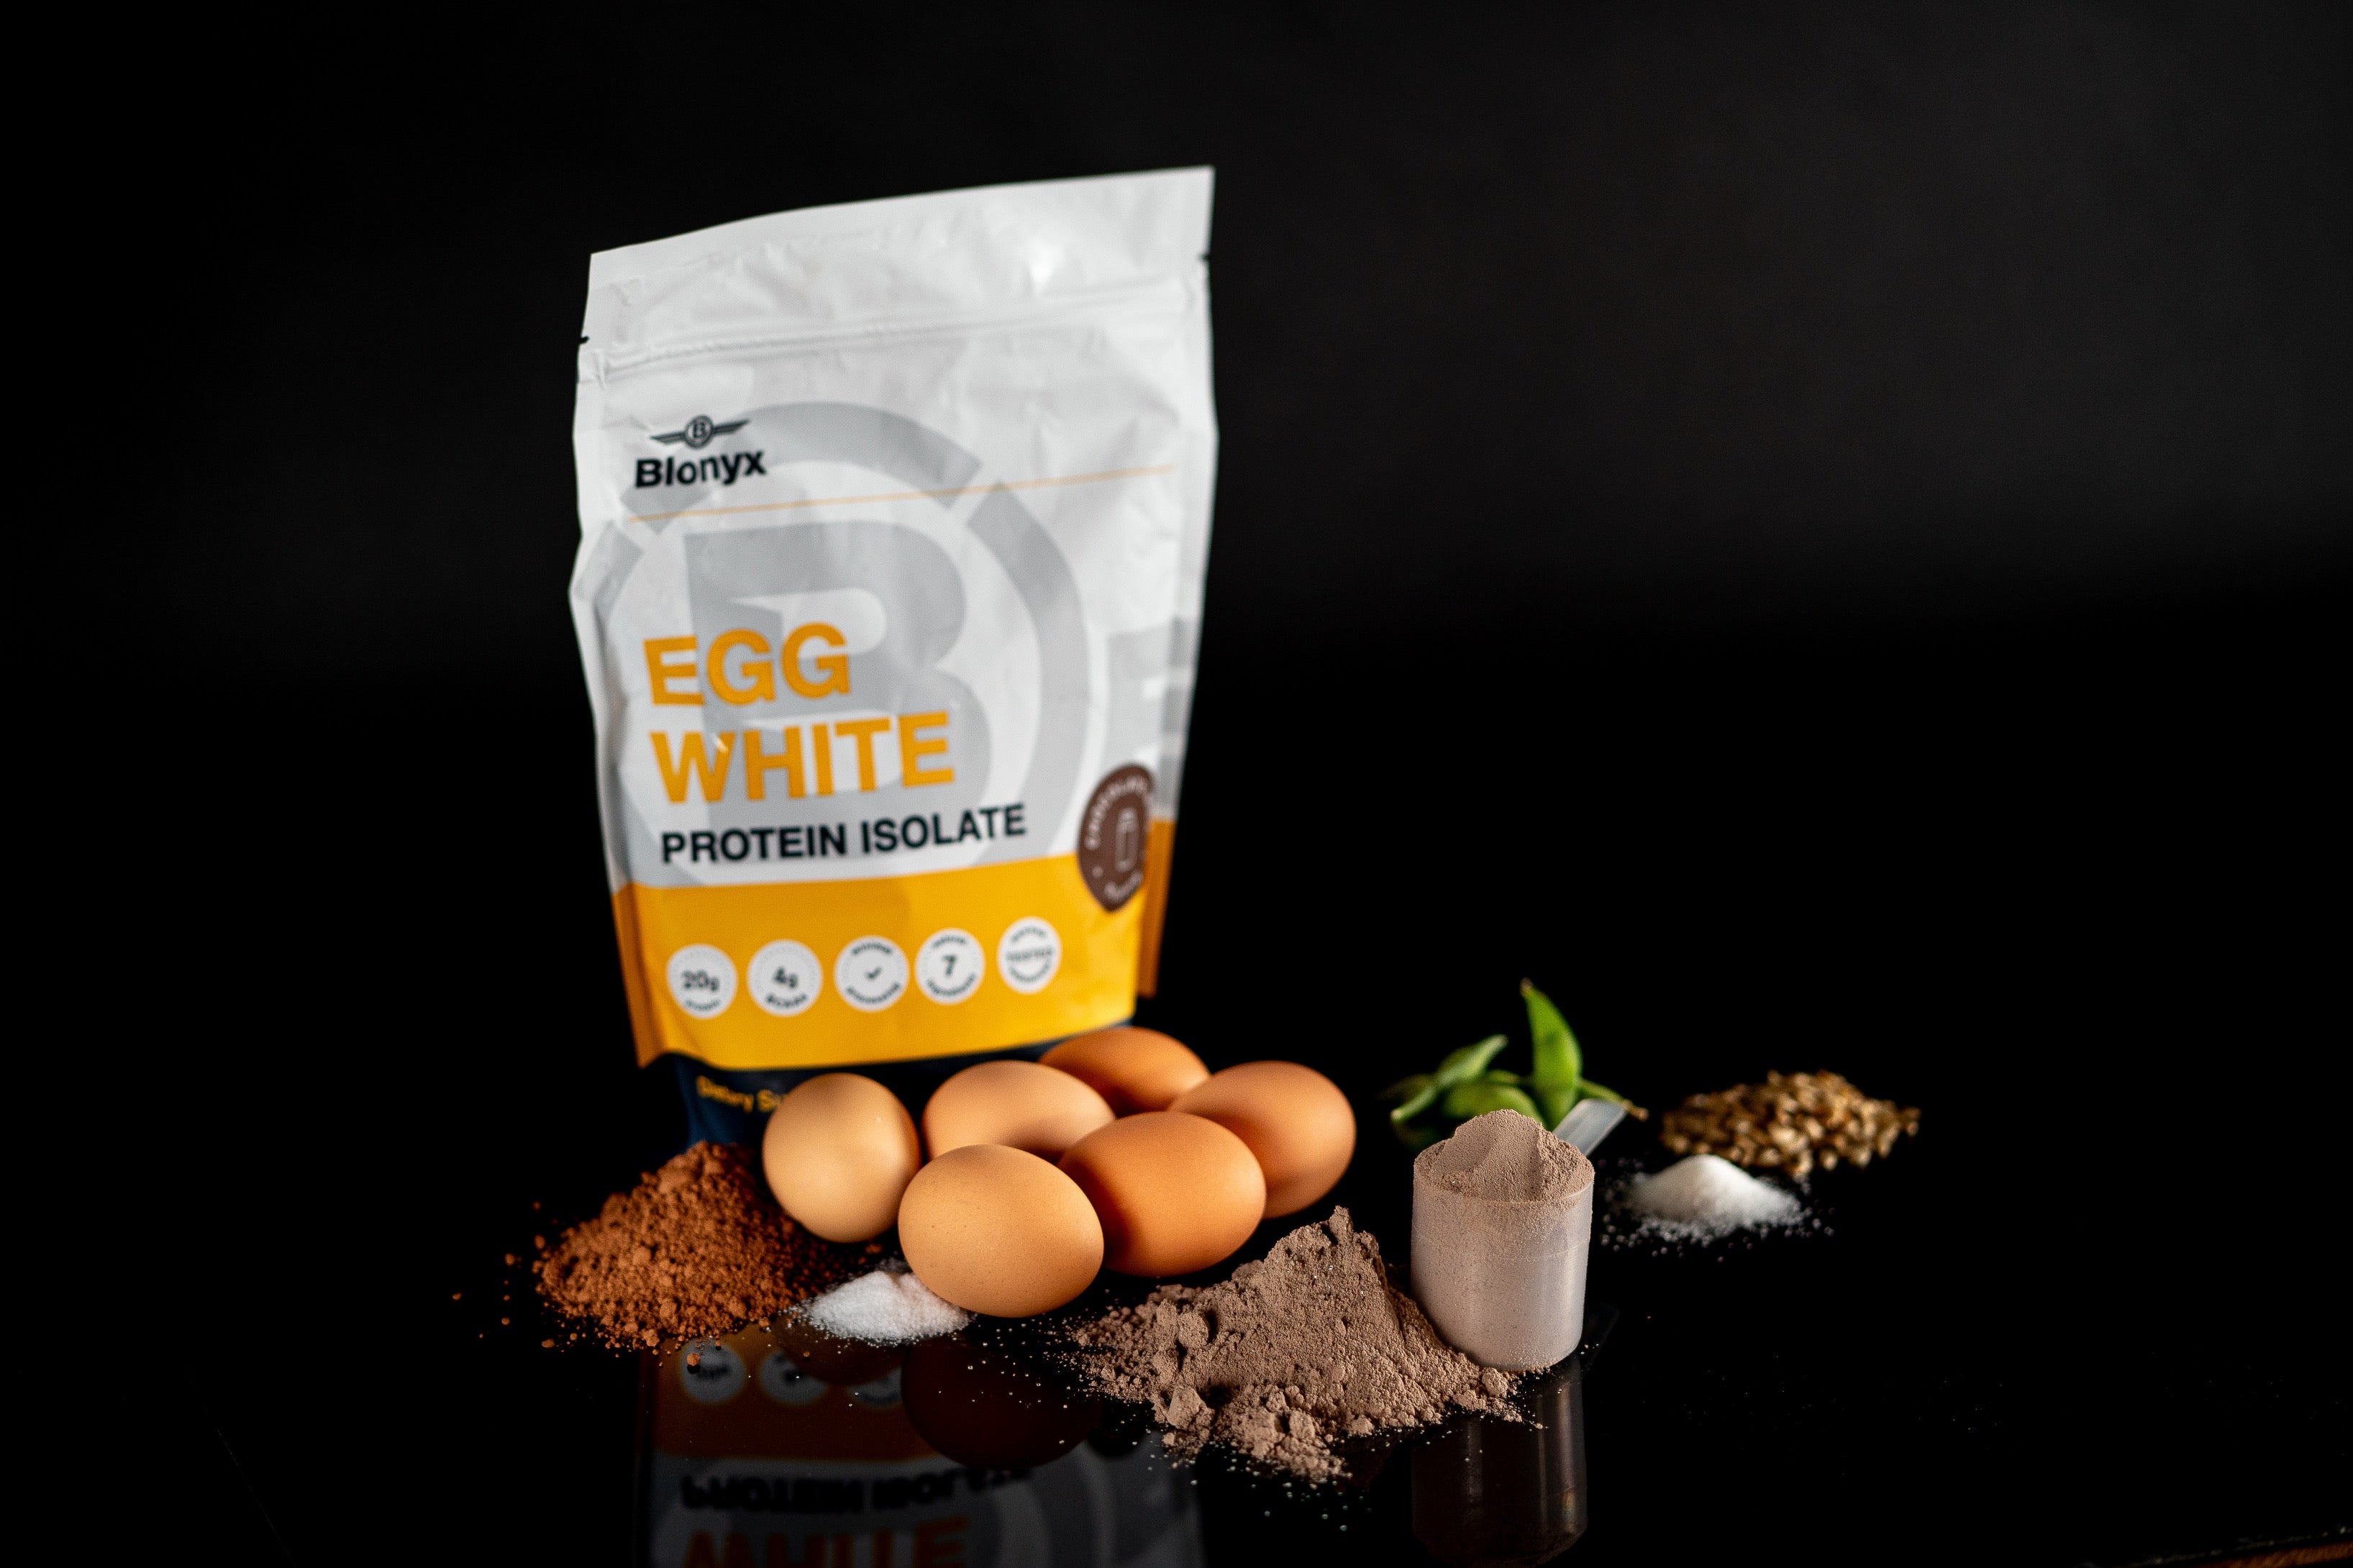 Blonyx Egg White Protein Isolate and its ingredients